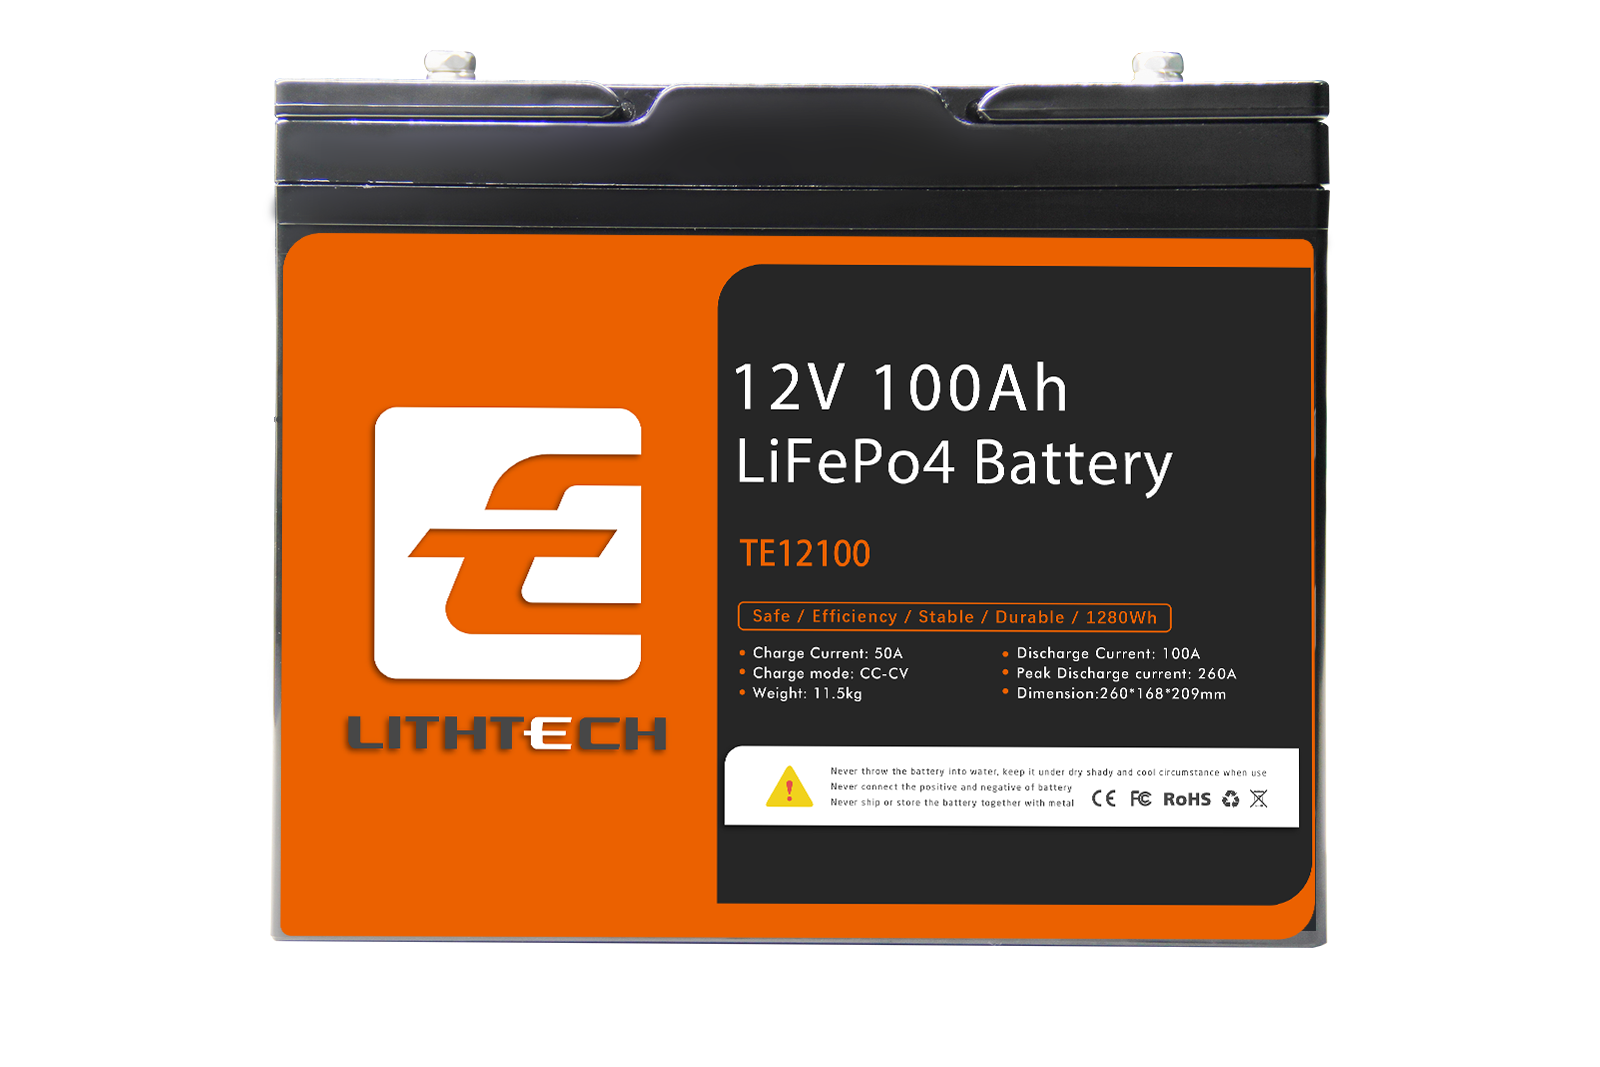 Lithtech TE12100 Solar Lifepo4 12v 100ah Lithium Iron Phosphate Battery Pack